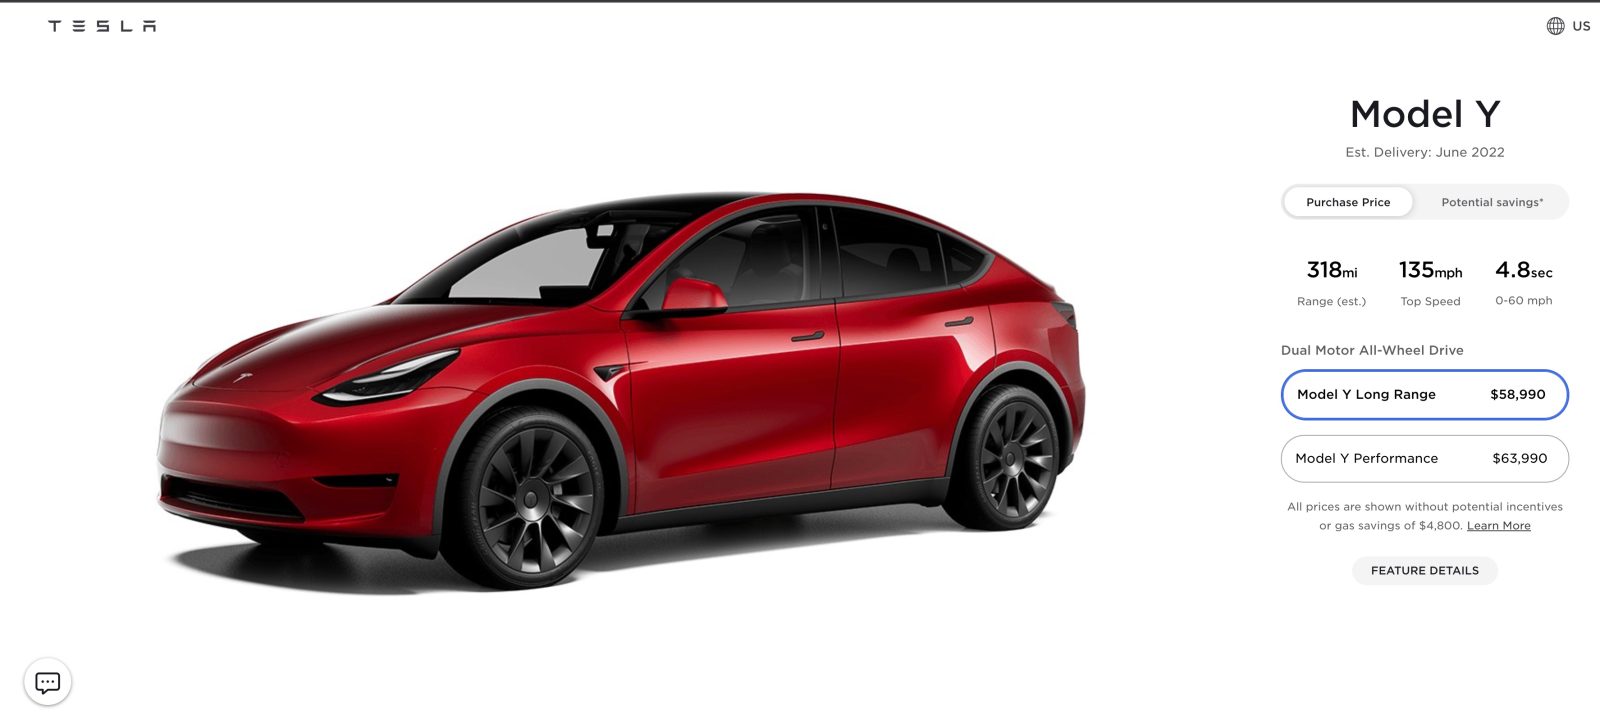 Tesla increases Model Y prices again as new incentives are coming